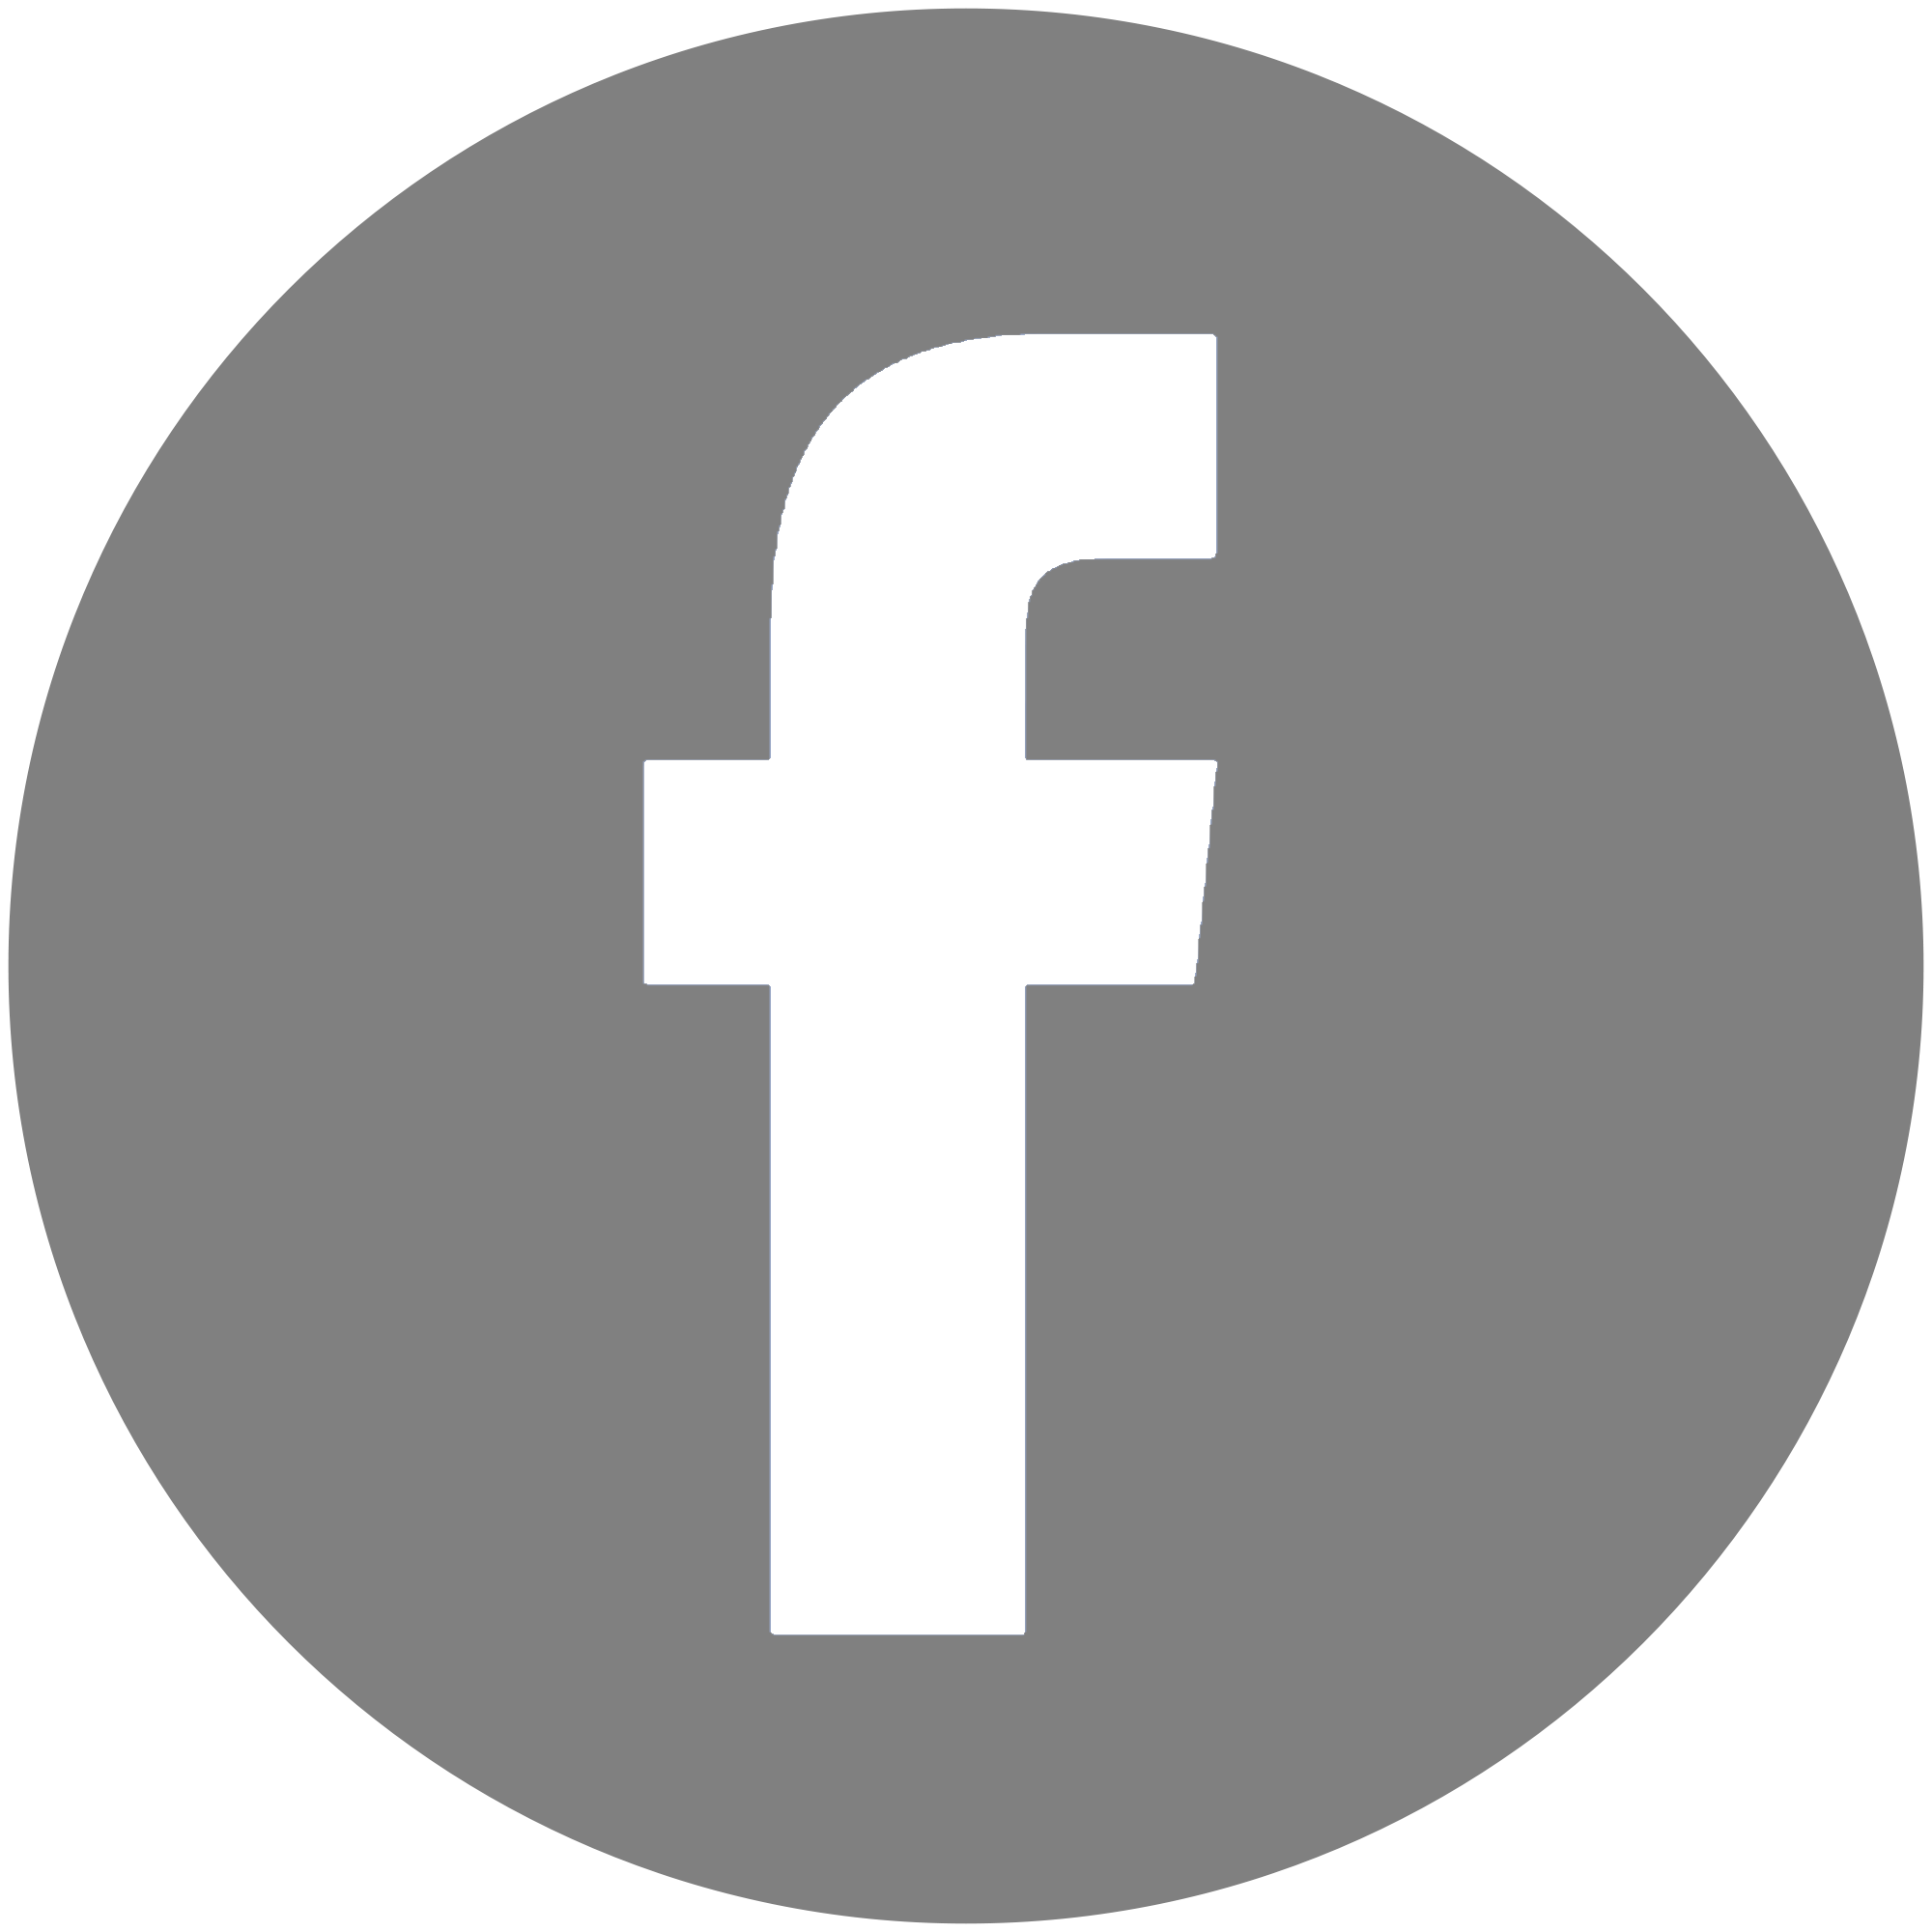 Comment Icon Facebook